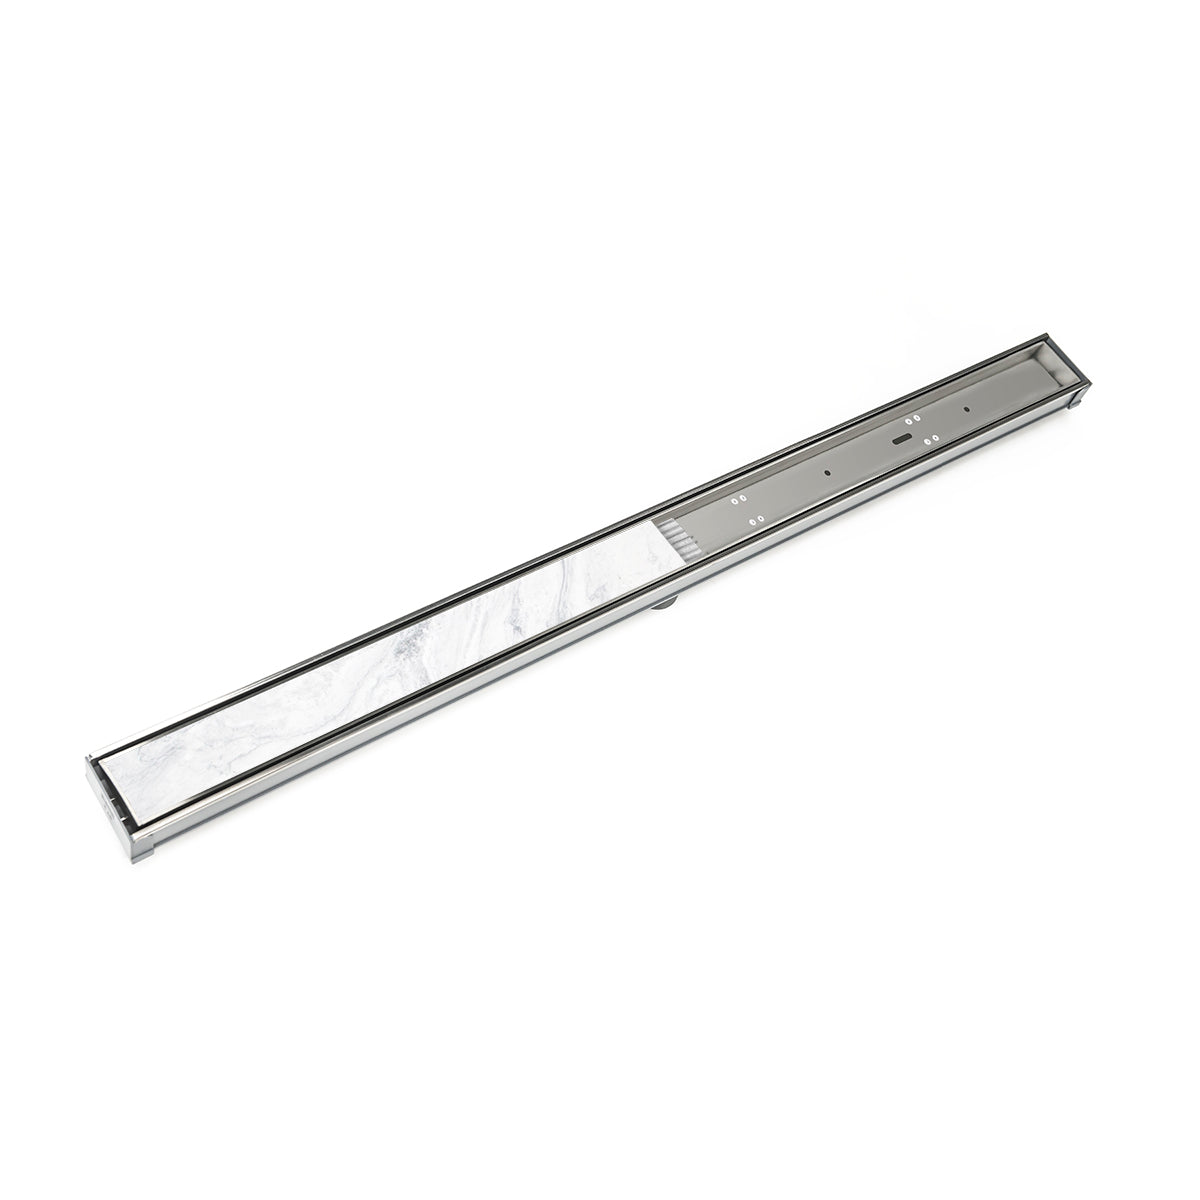 Infinity Drain 96" S-PVC Series Low Profile Site Sizable Linear Drain Kit with 2 1/2" Tile Insert Frame